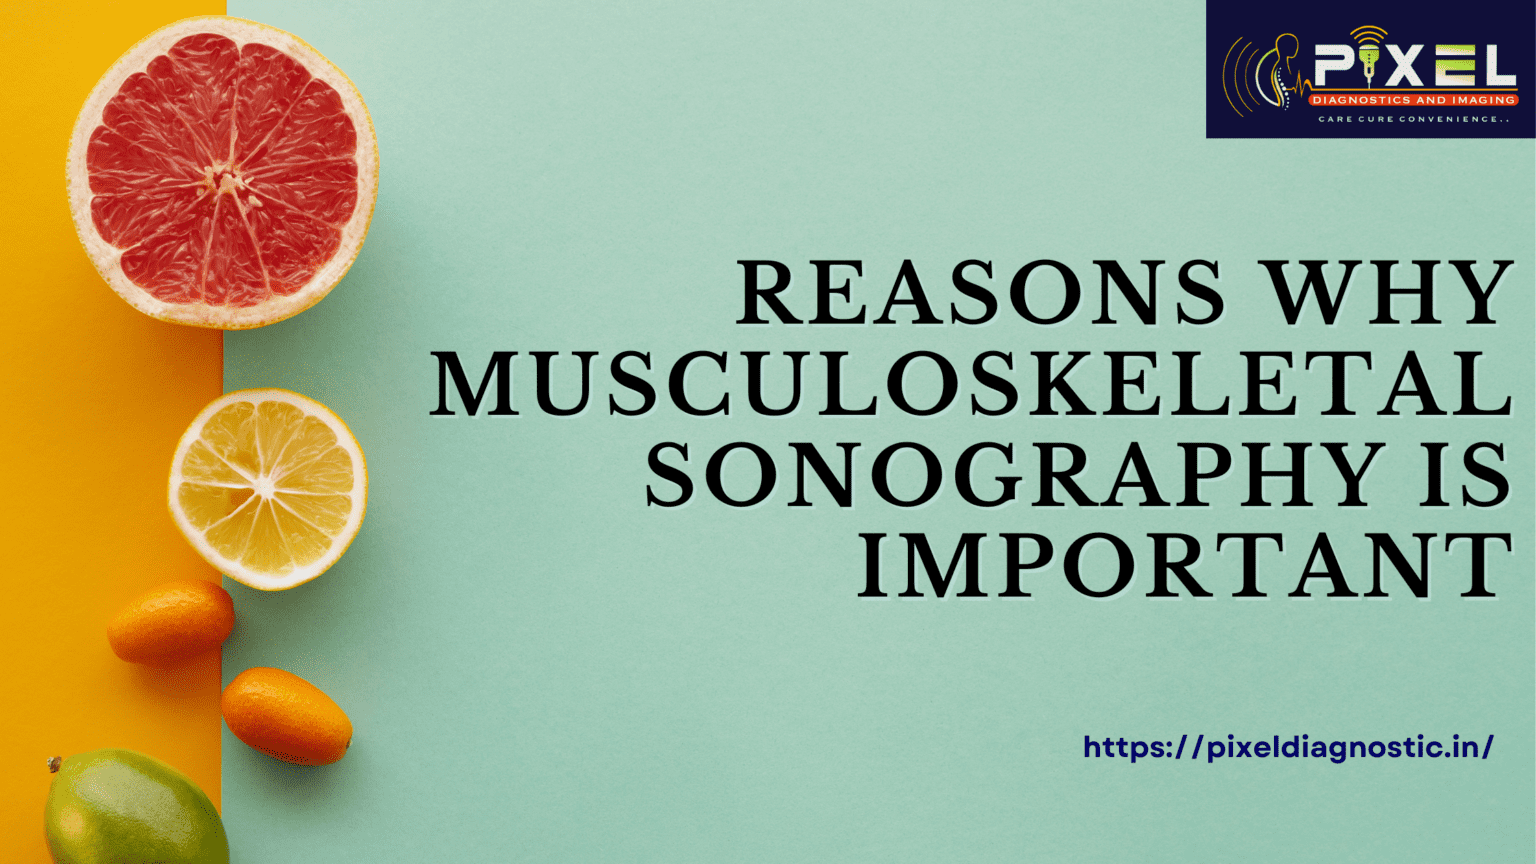 Reasons why musculoskeletal sonography is important